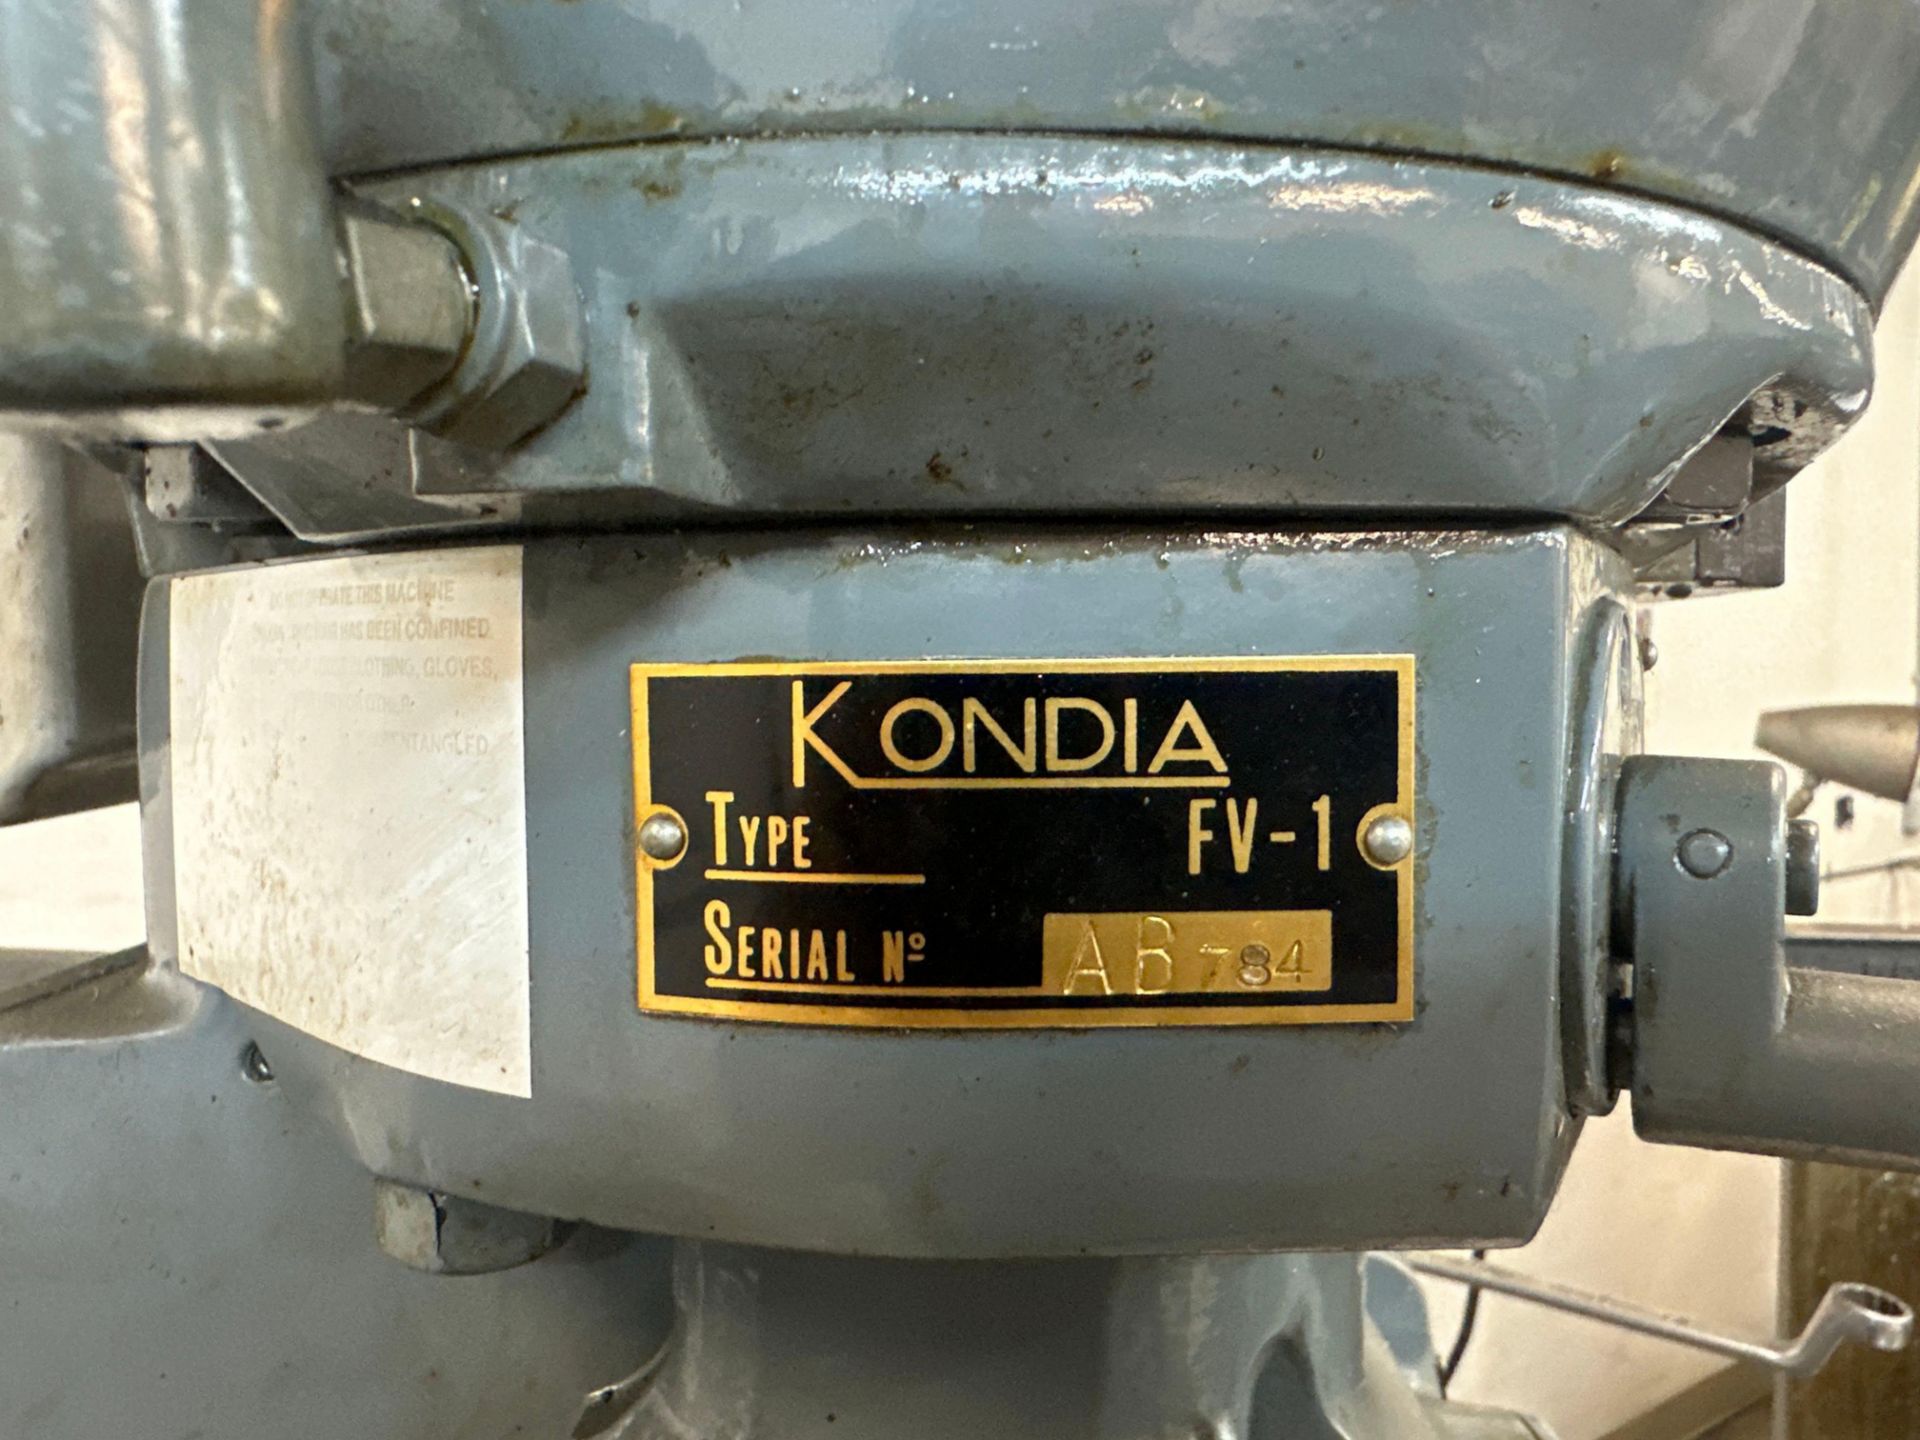 Clausing Kondia FV1 Vertical Mill, s/n AB-784 Includes: 9” Phase II Rotary Table & Newall Digital Di - Image 8 of 8